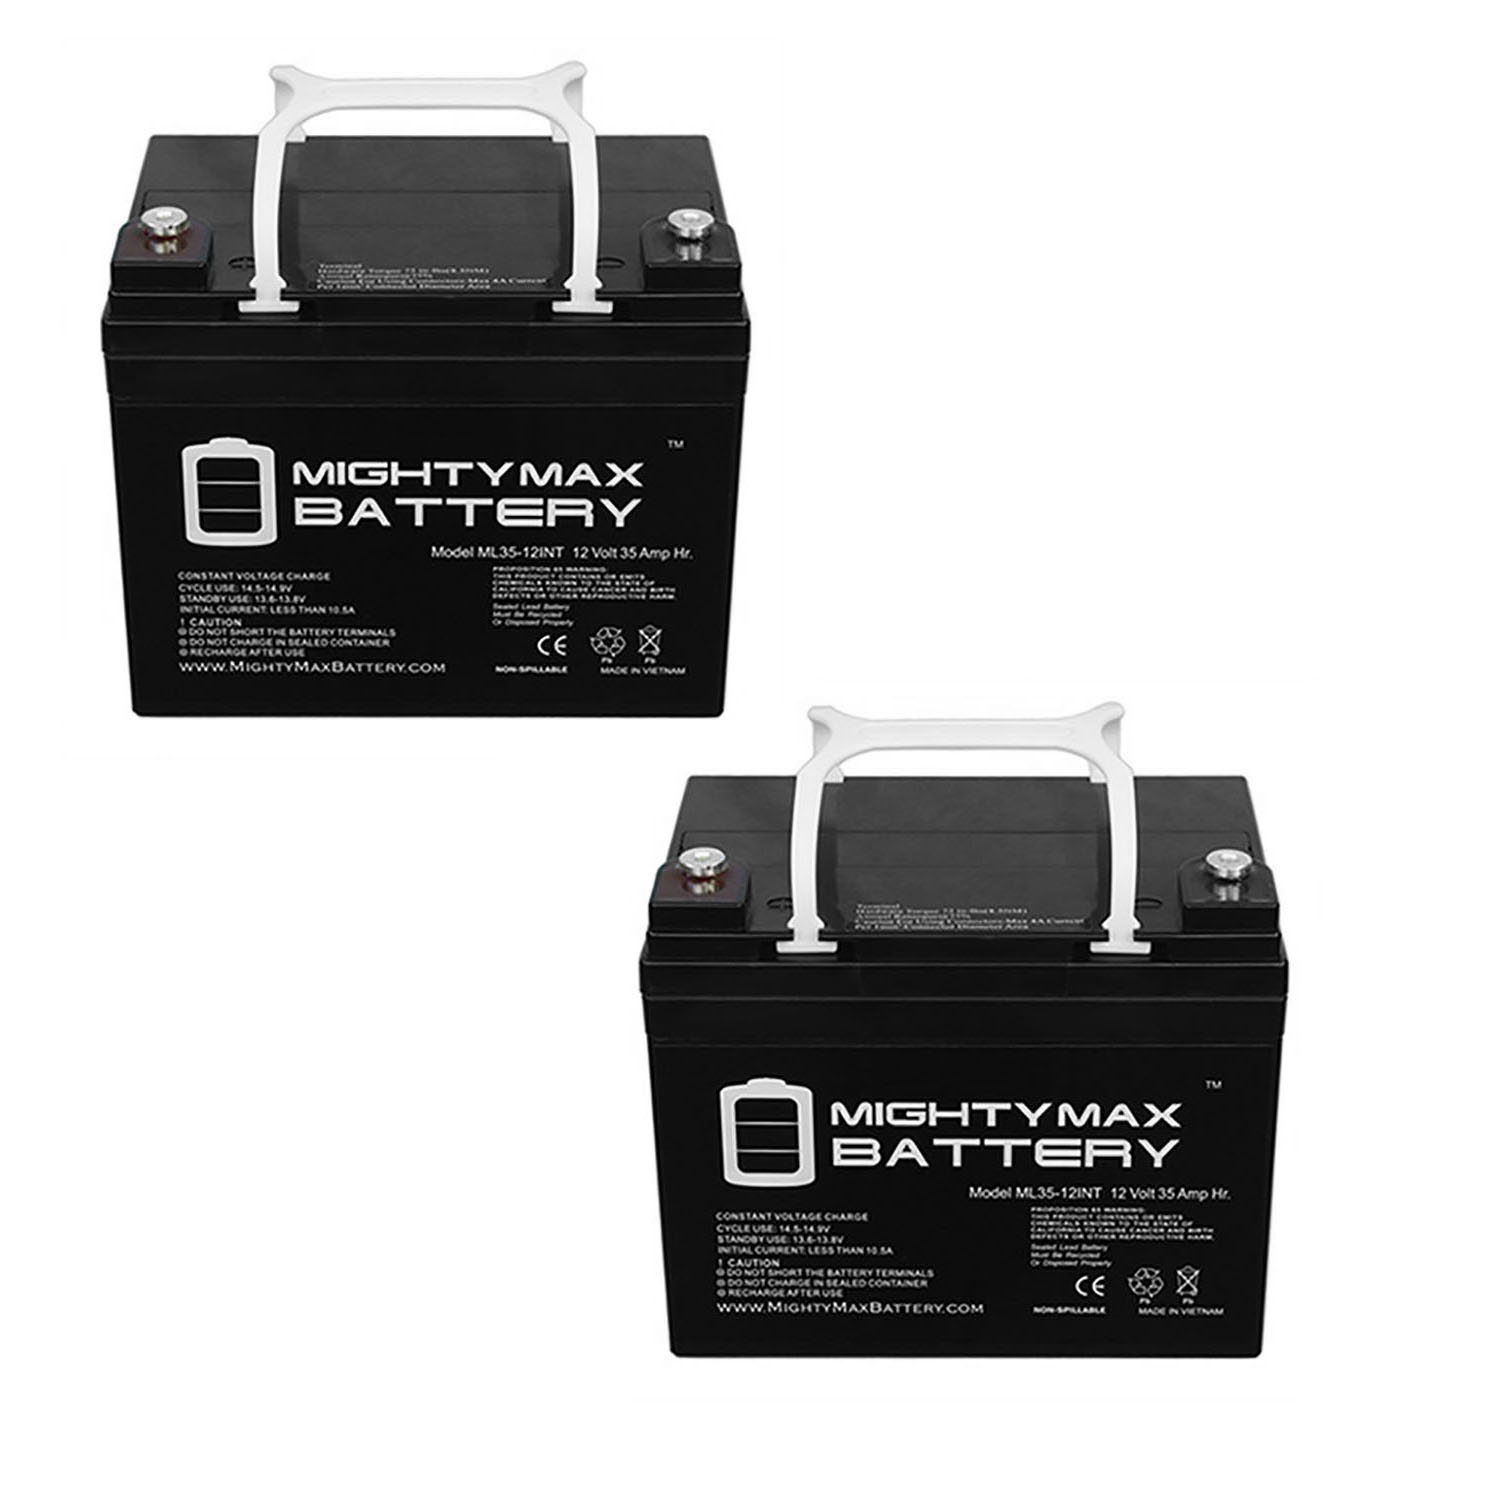 12V 35AH INT Replacement Battery for Cub Cadet 365L - 2 Pack